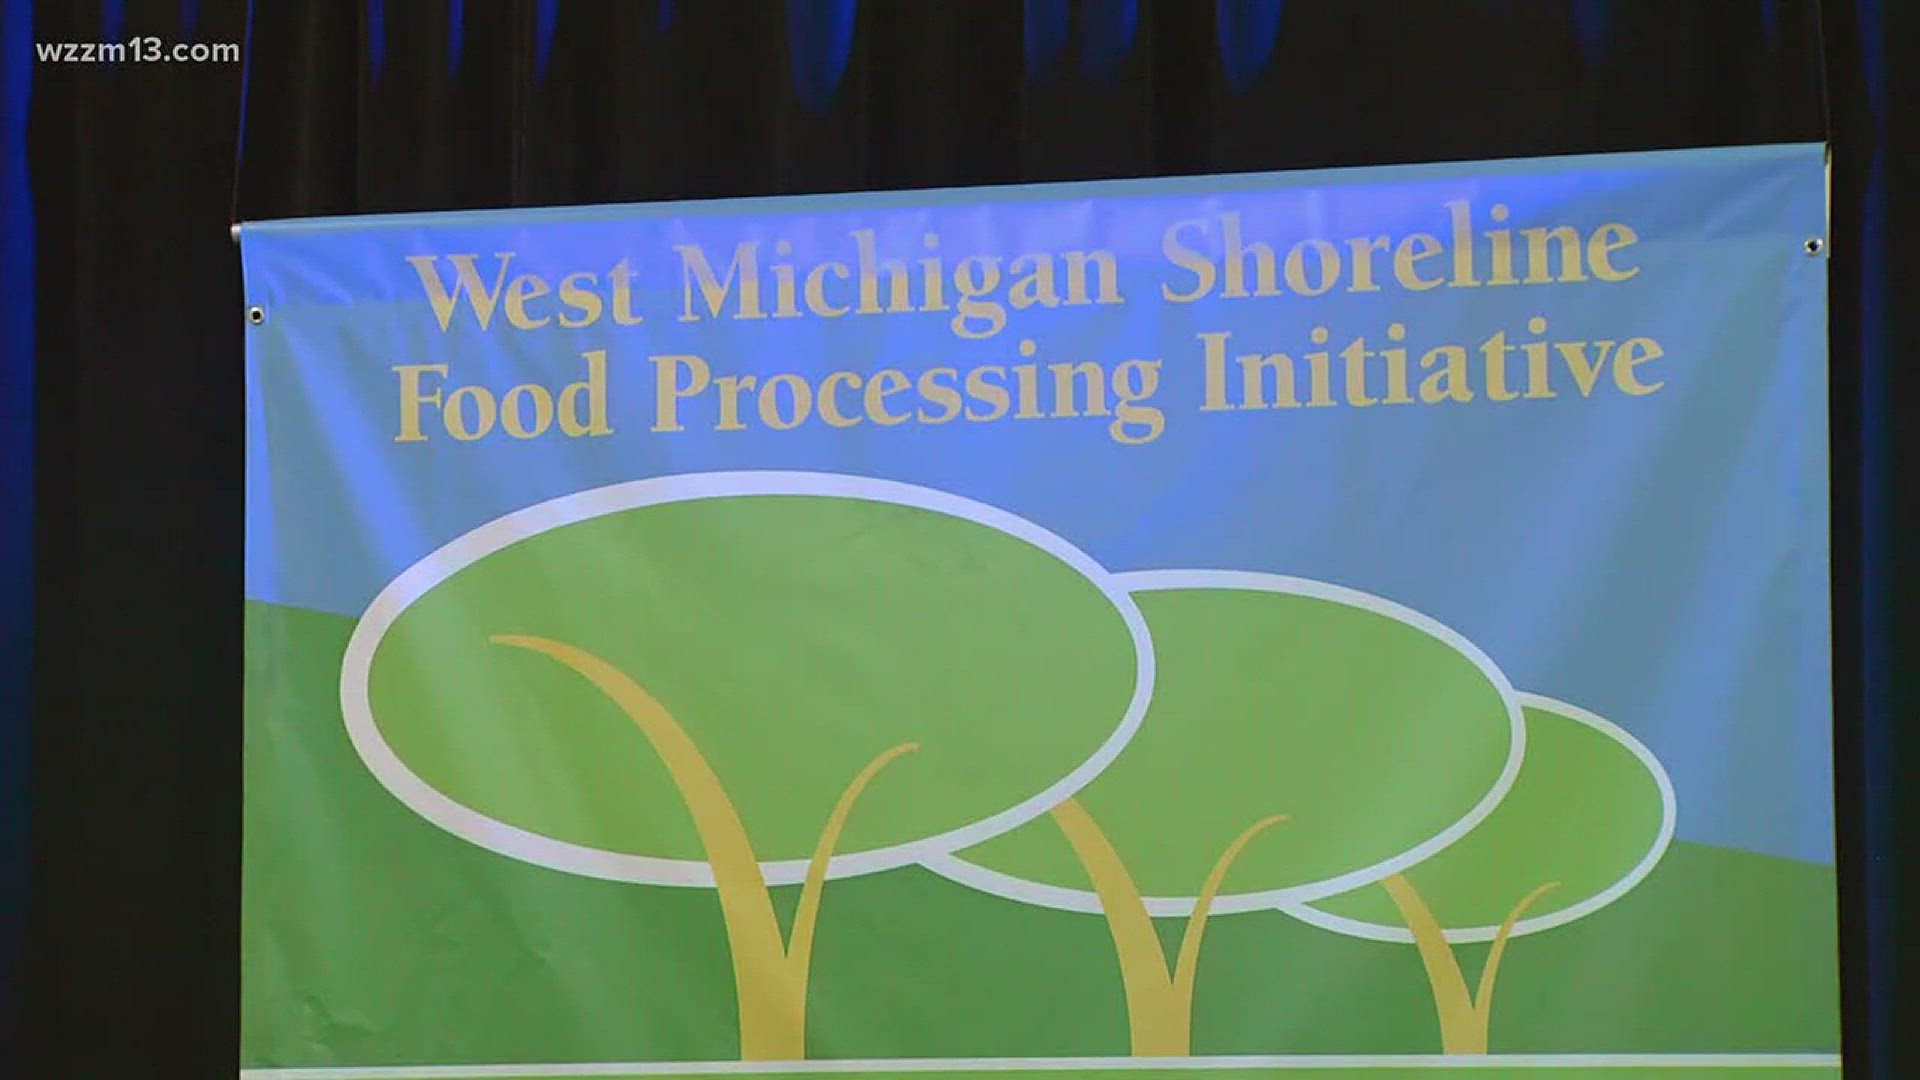 A new effort to grow the lakeshore's agriculture economy is underway in Muskegon.